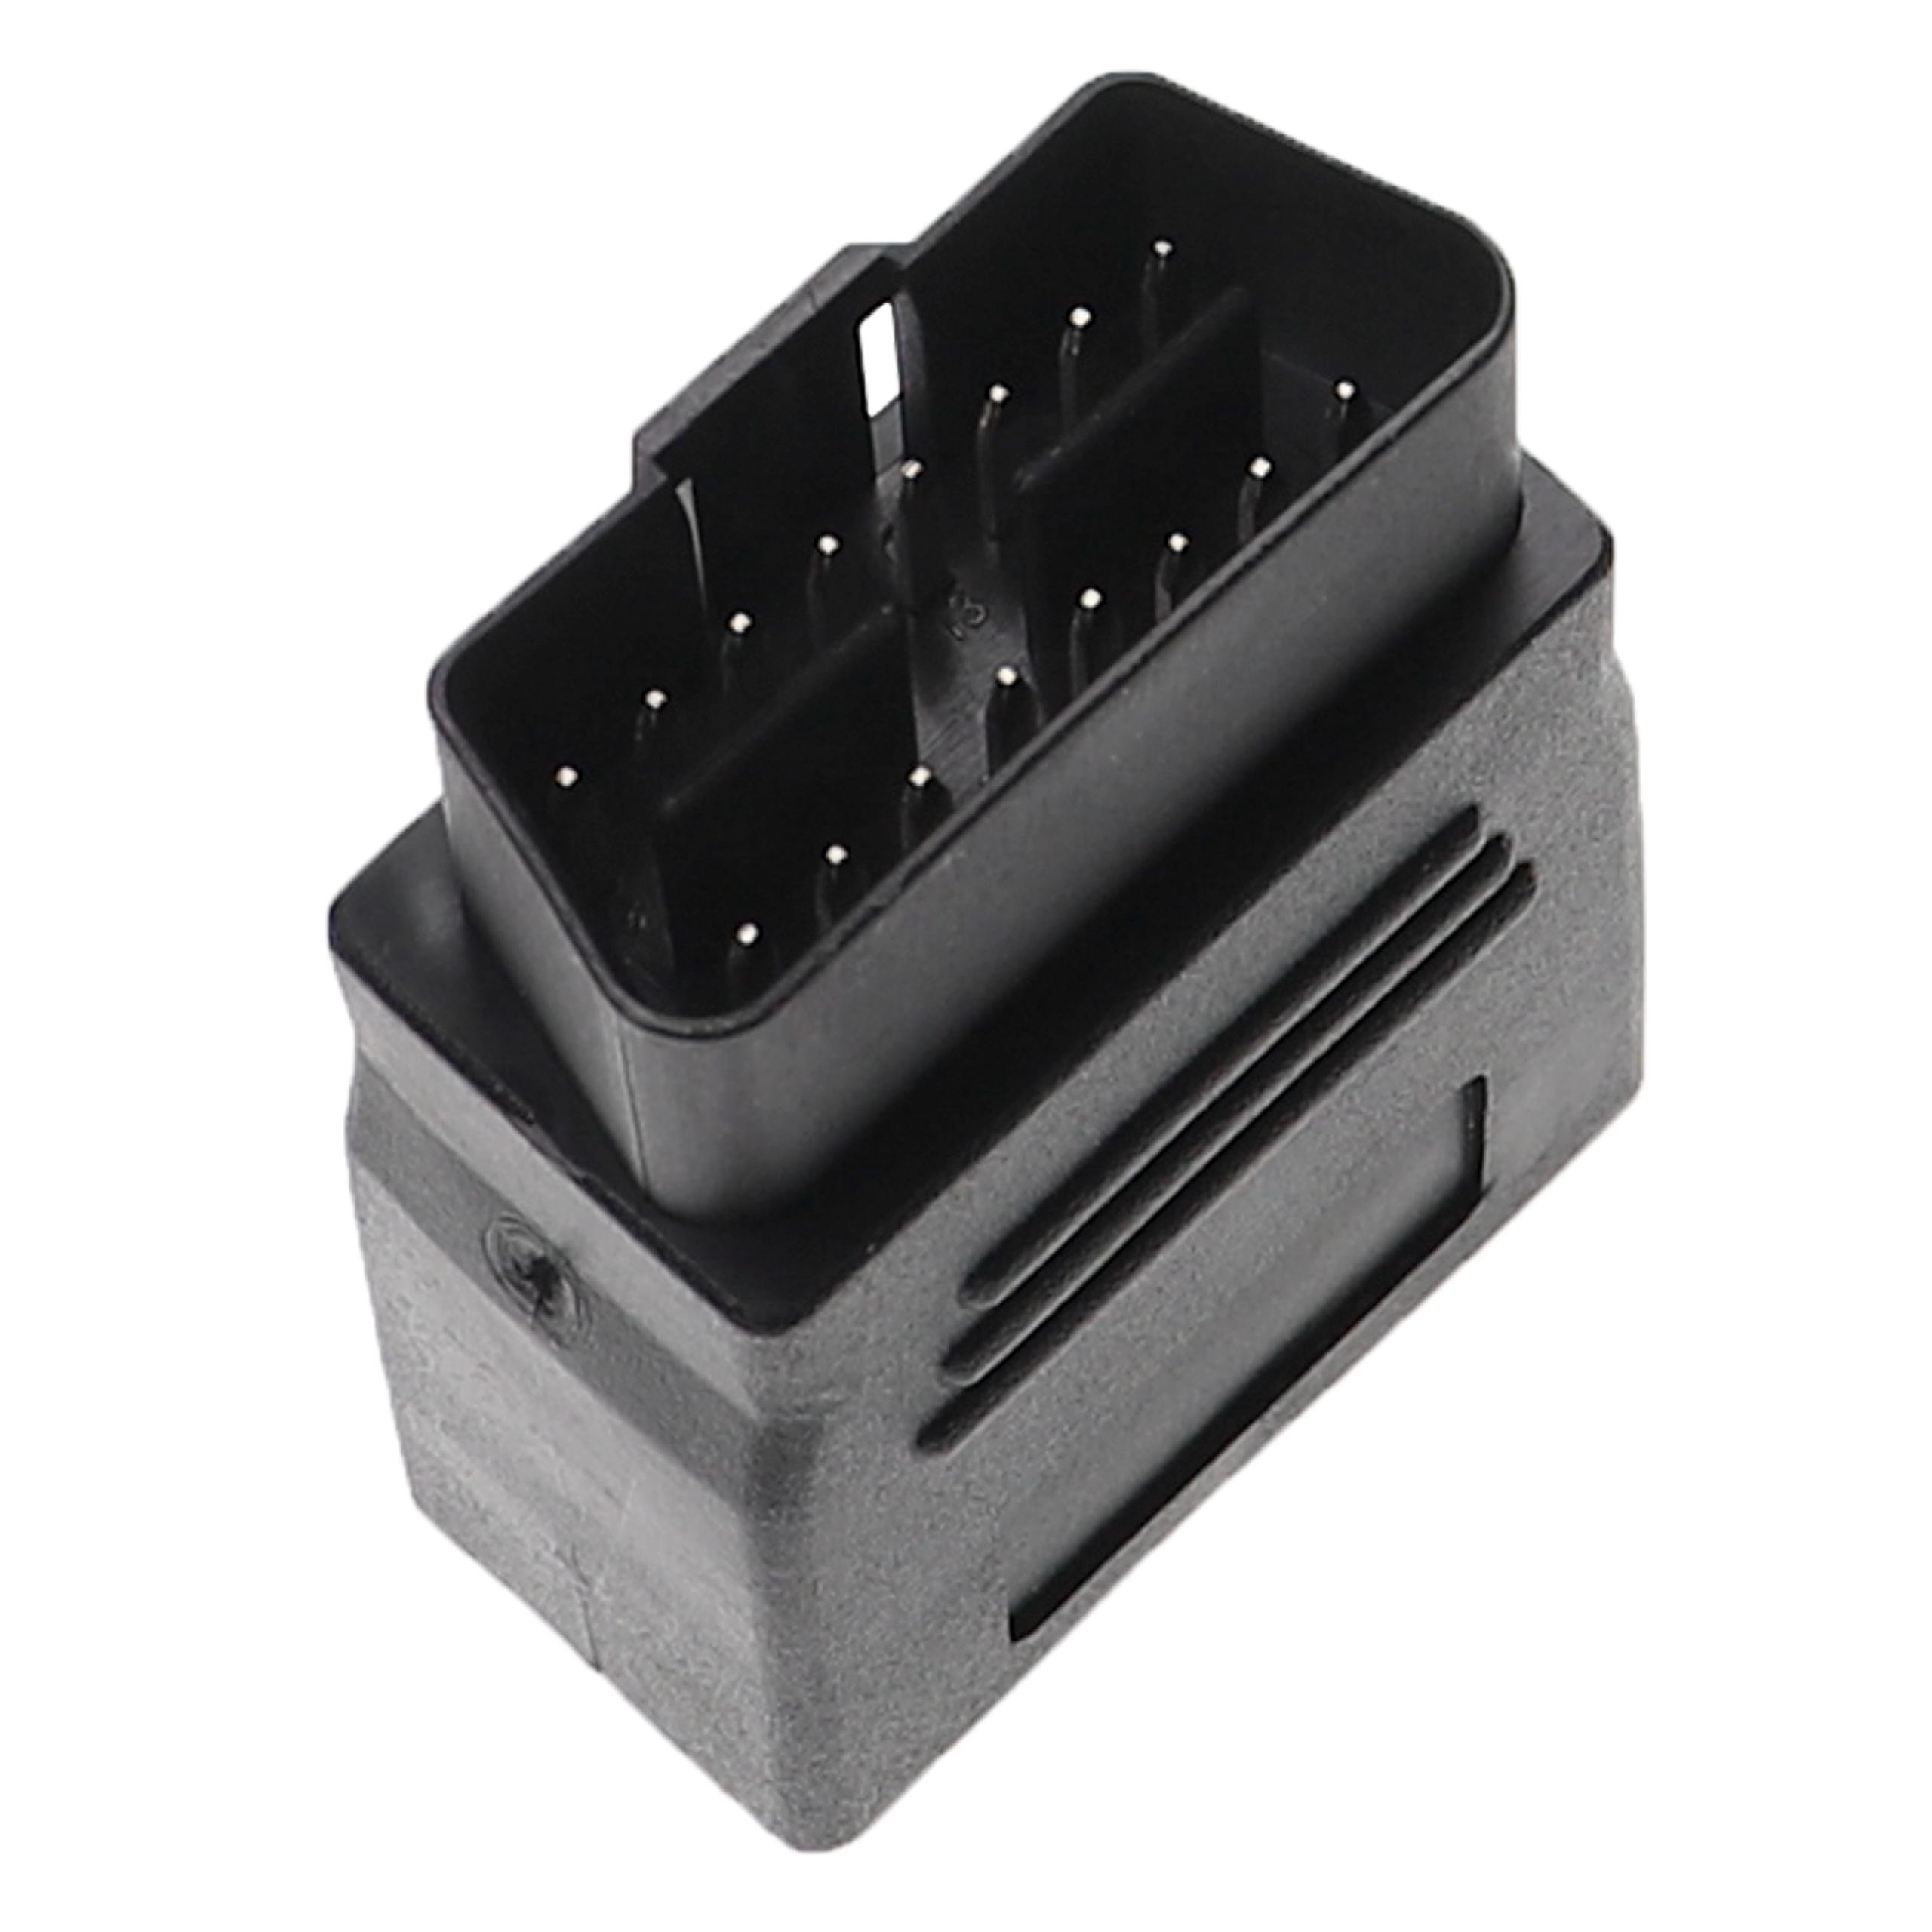 OBD Adapter suitable forVehicle / Diagnostic Device - OBD2 Cable